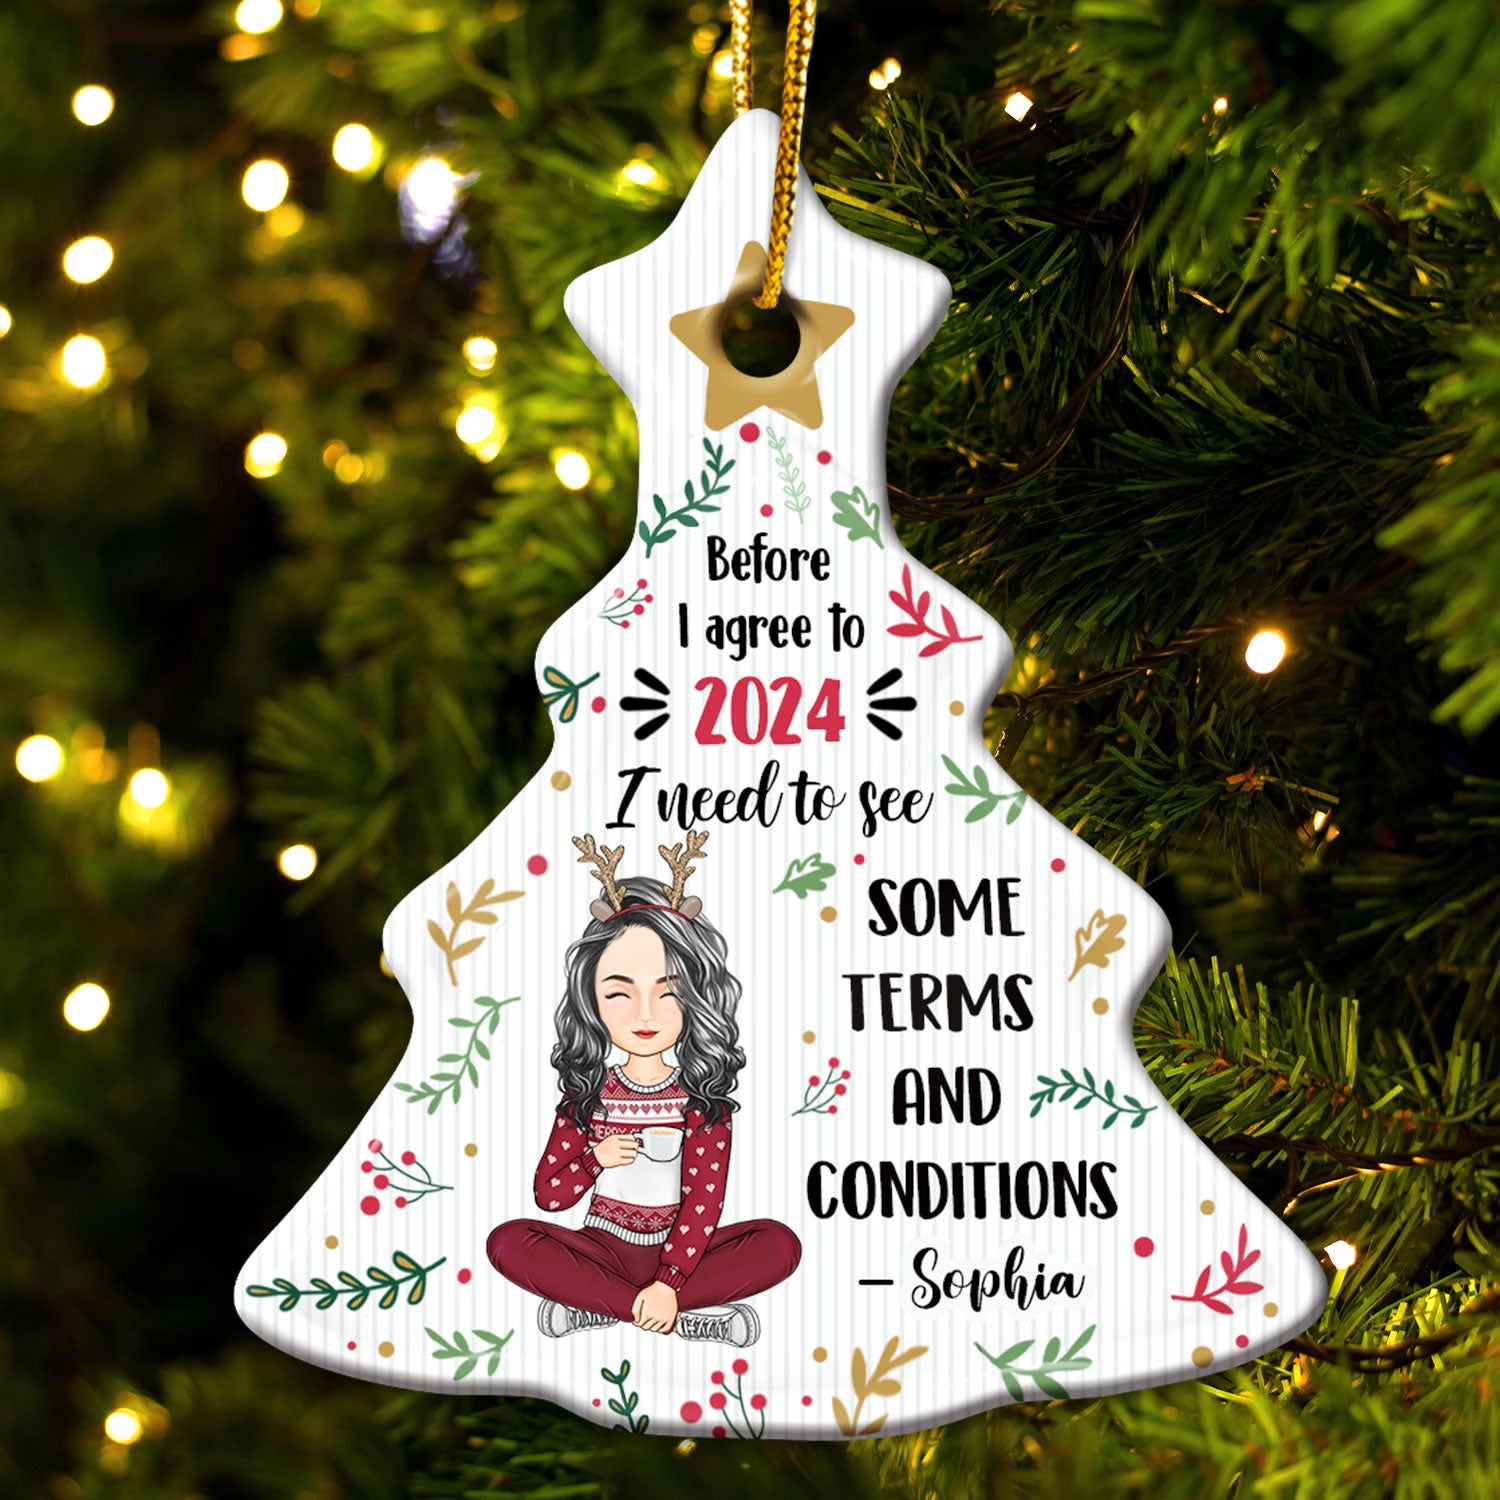 Terms And Conditions - Christmas Gift For Yourself, Gift For Women, Gift For Men - Personalized Tree Ceramic Ornament